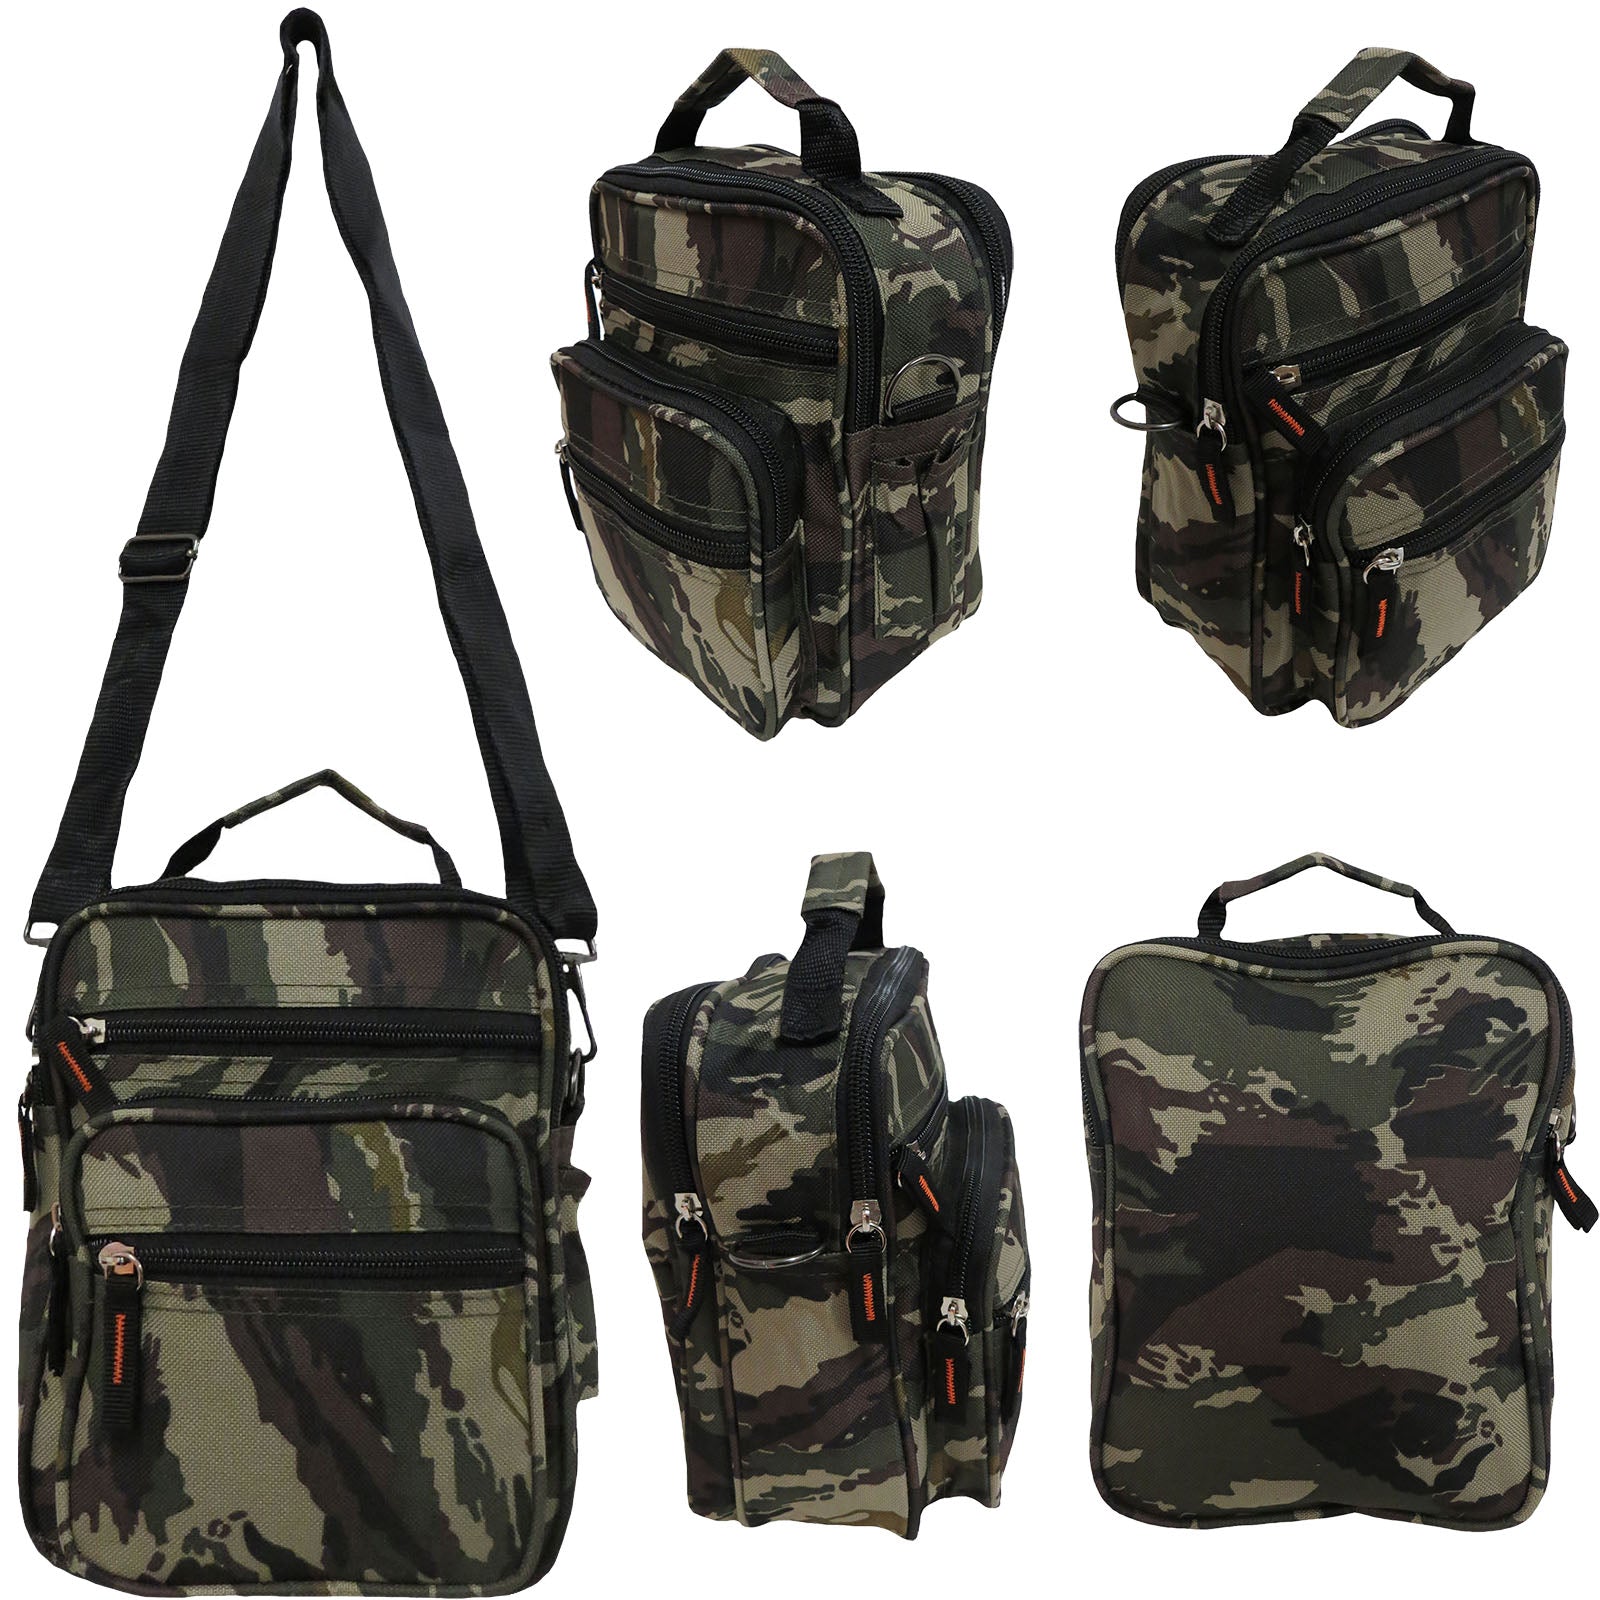 Convertible Wholesale Camouflage Messenger Bag Fanny Pack - Alessa Jamie